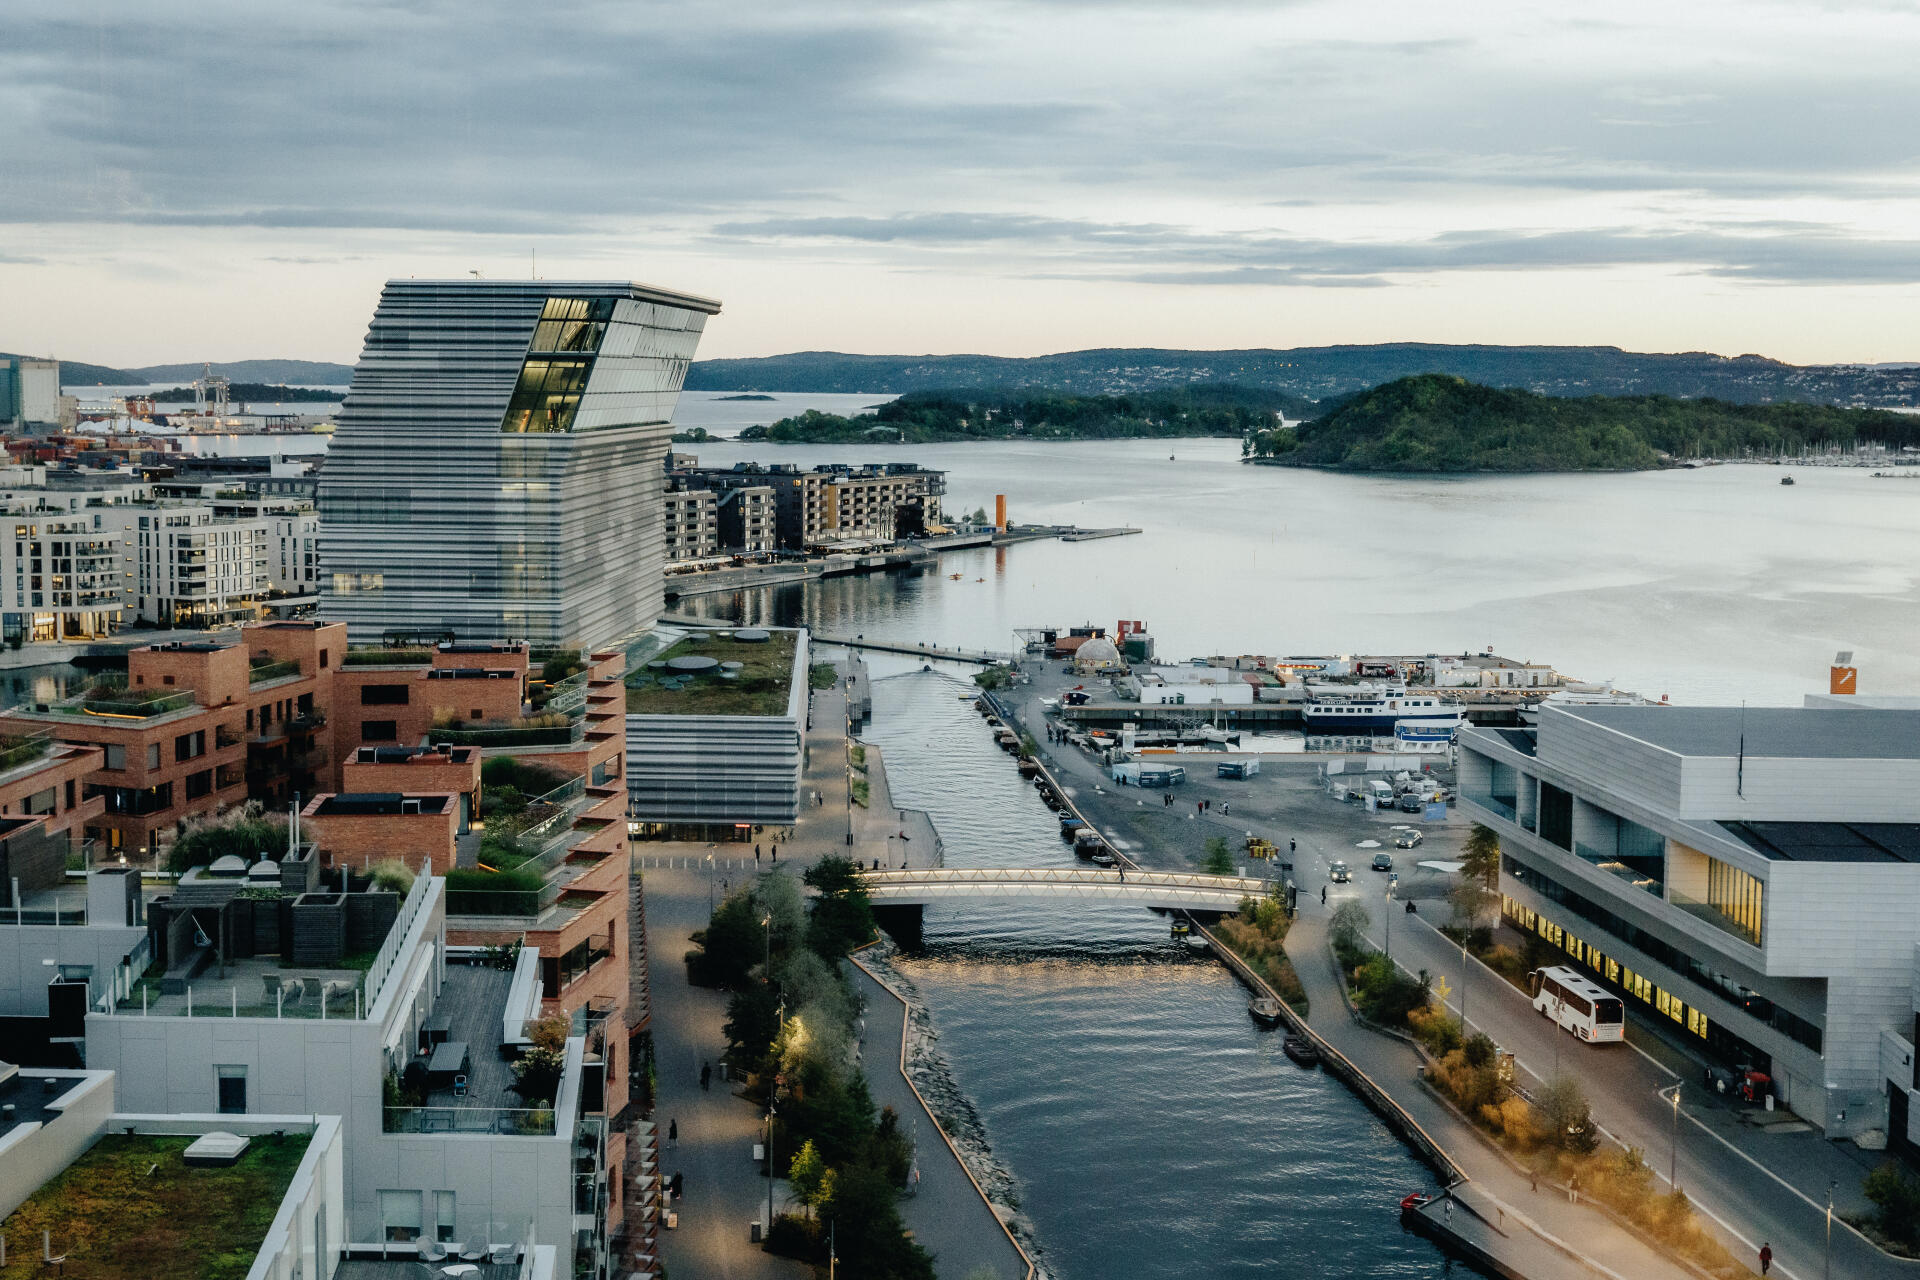 View of the harbor in Oslo, Norway, on October 3, 2022.